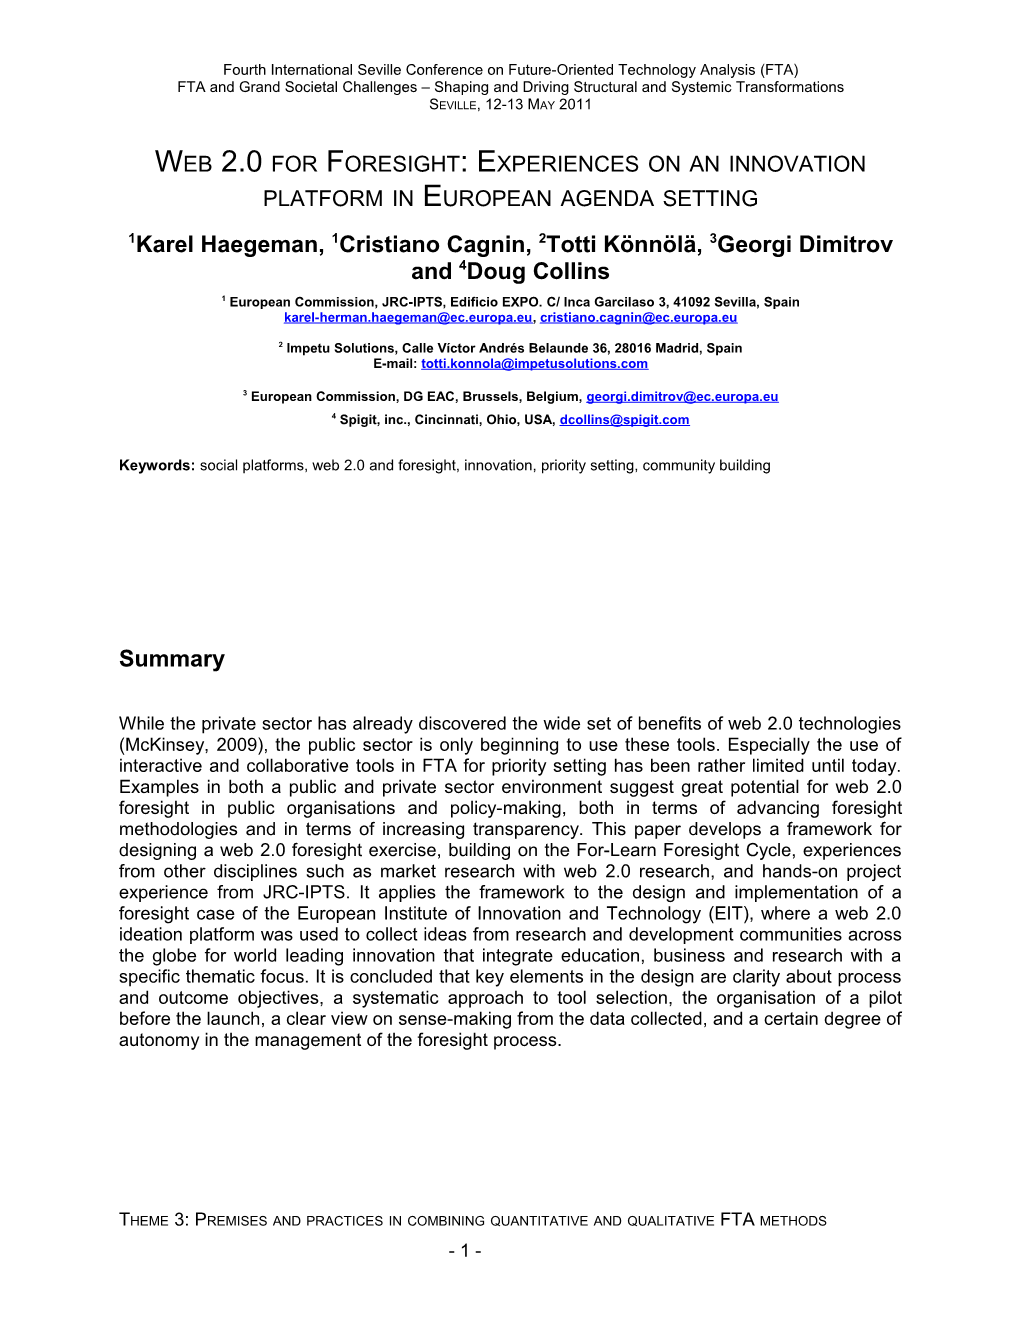 Web 2.0 for Foresight: Experiences on an Innovation Platform in European Agenda Setting